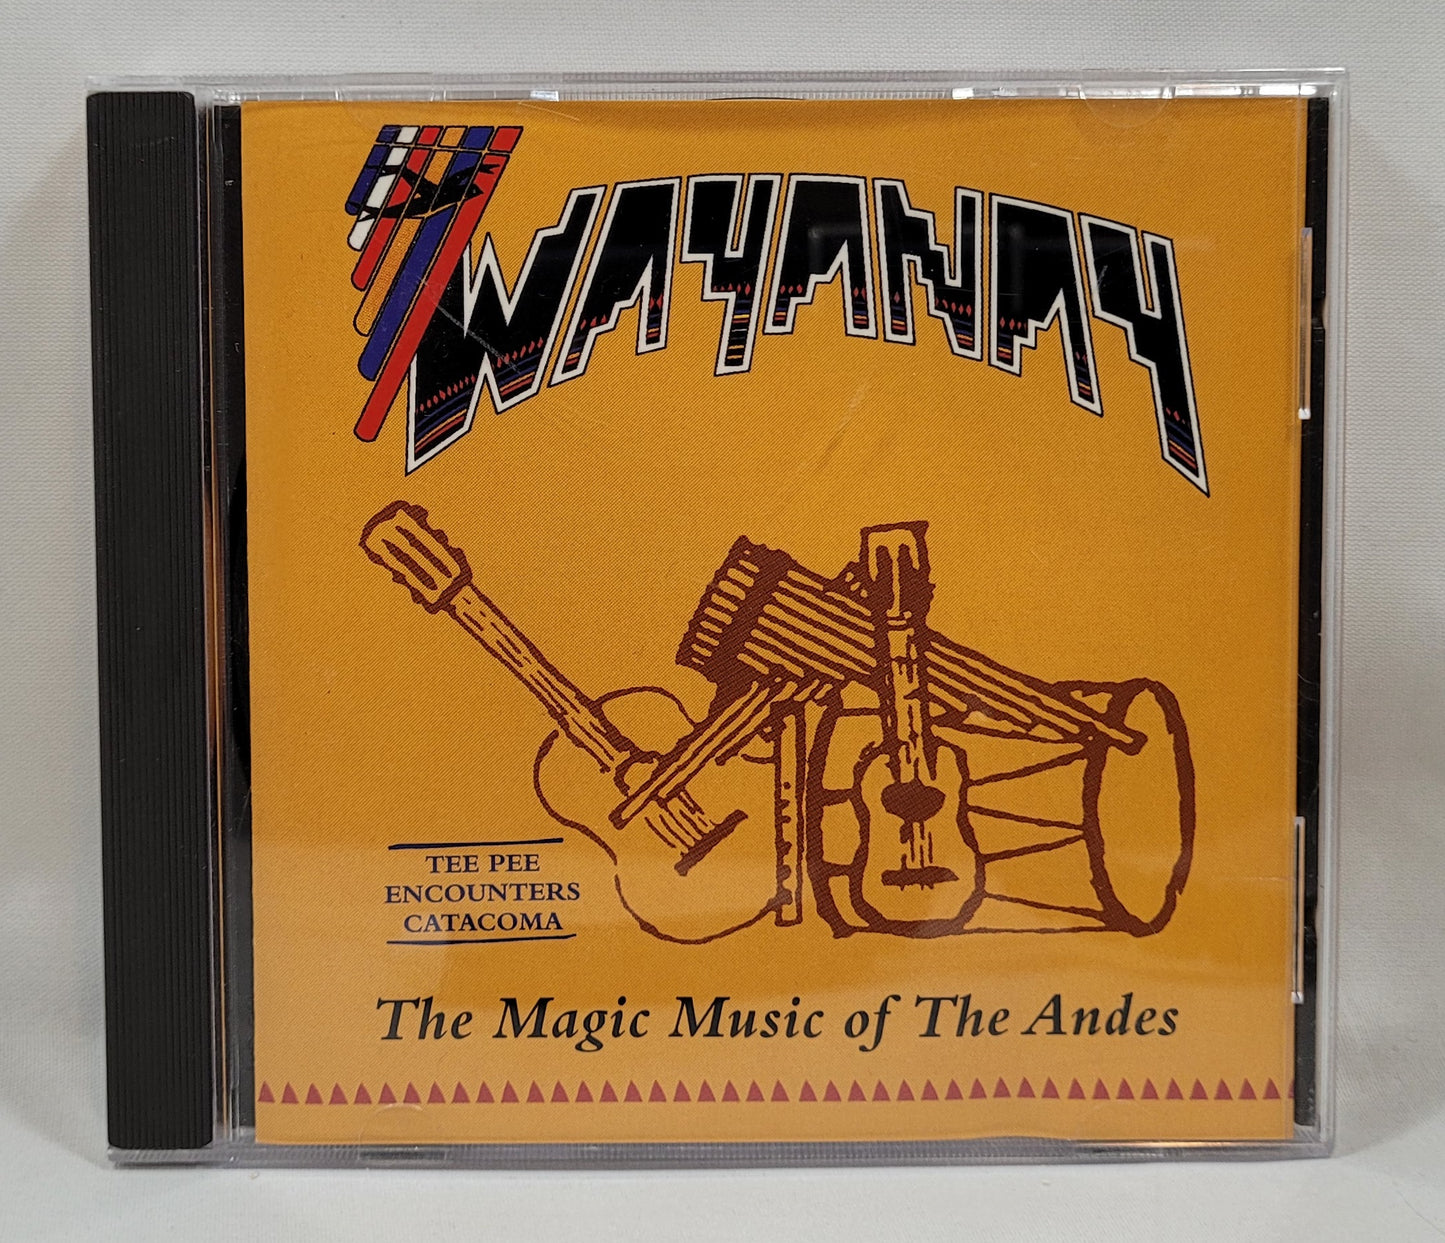 Wayanay - Tee Pee Encounters Catacoma (The Magic Music of the Andes) [Used CD]